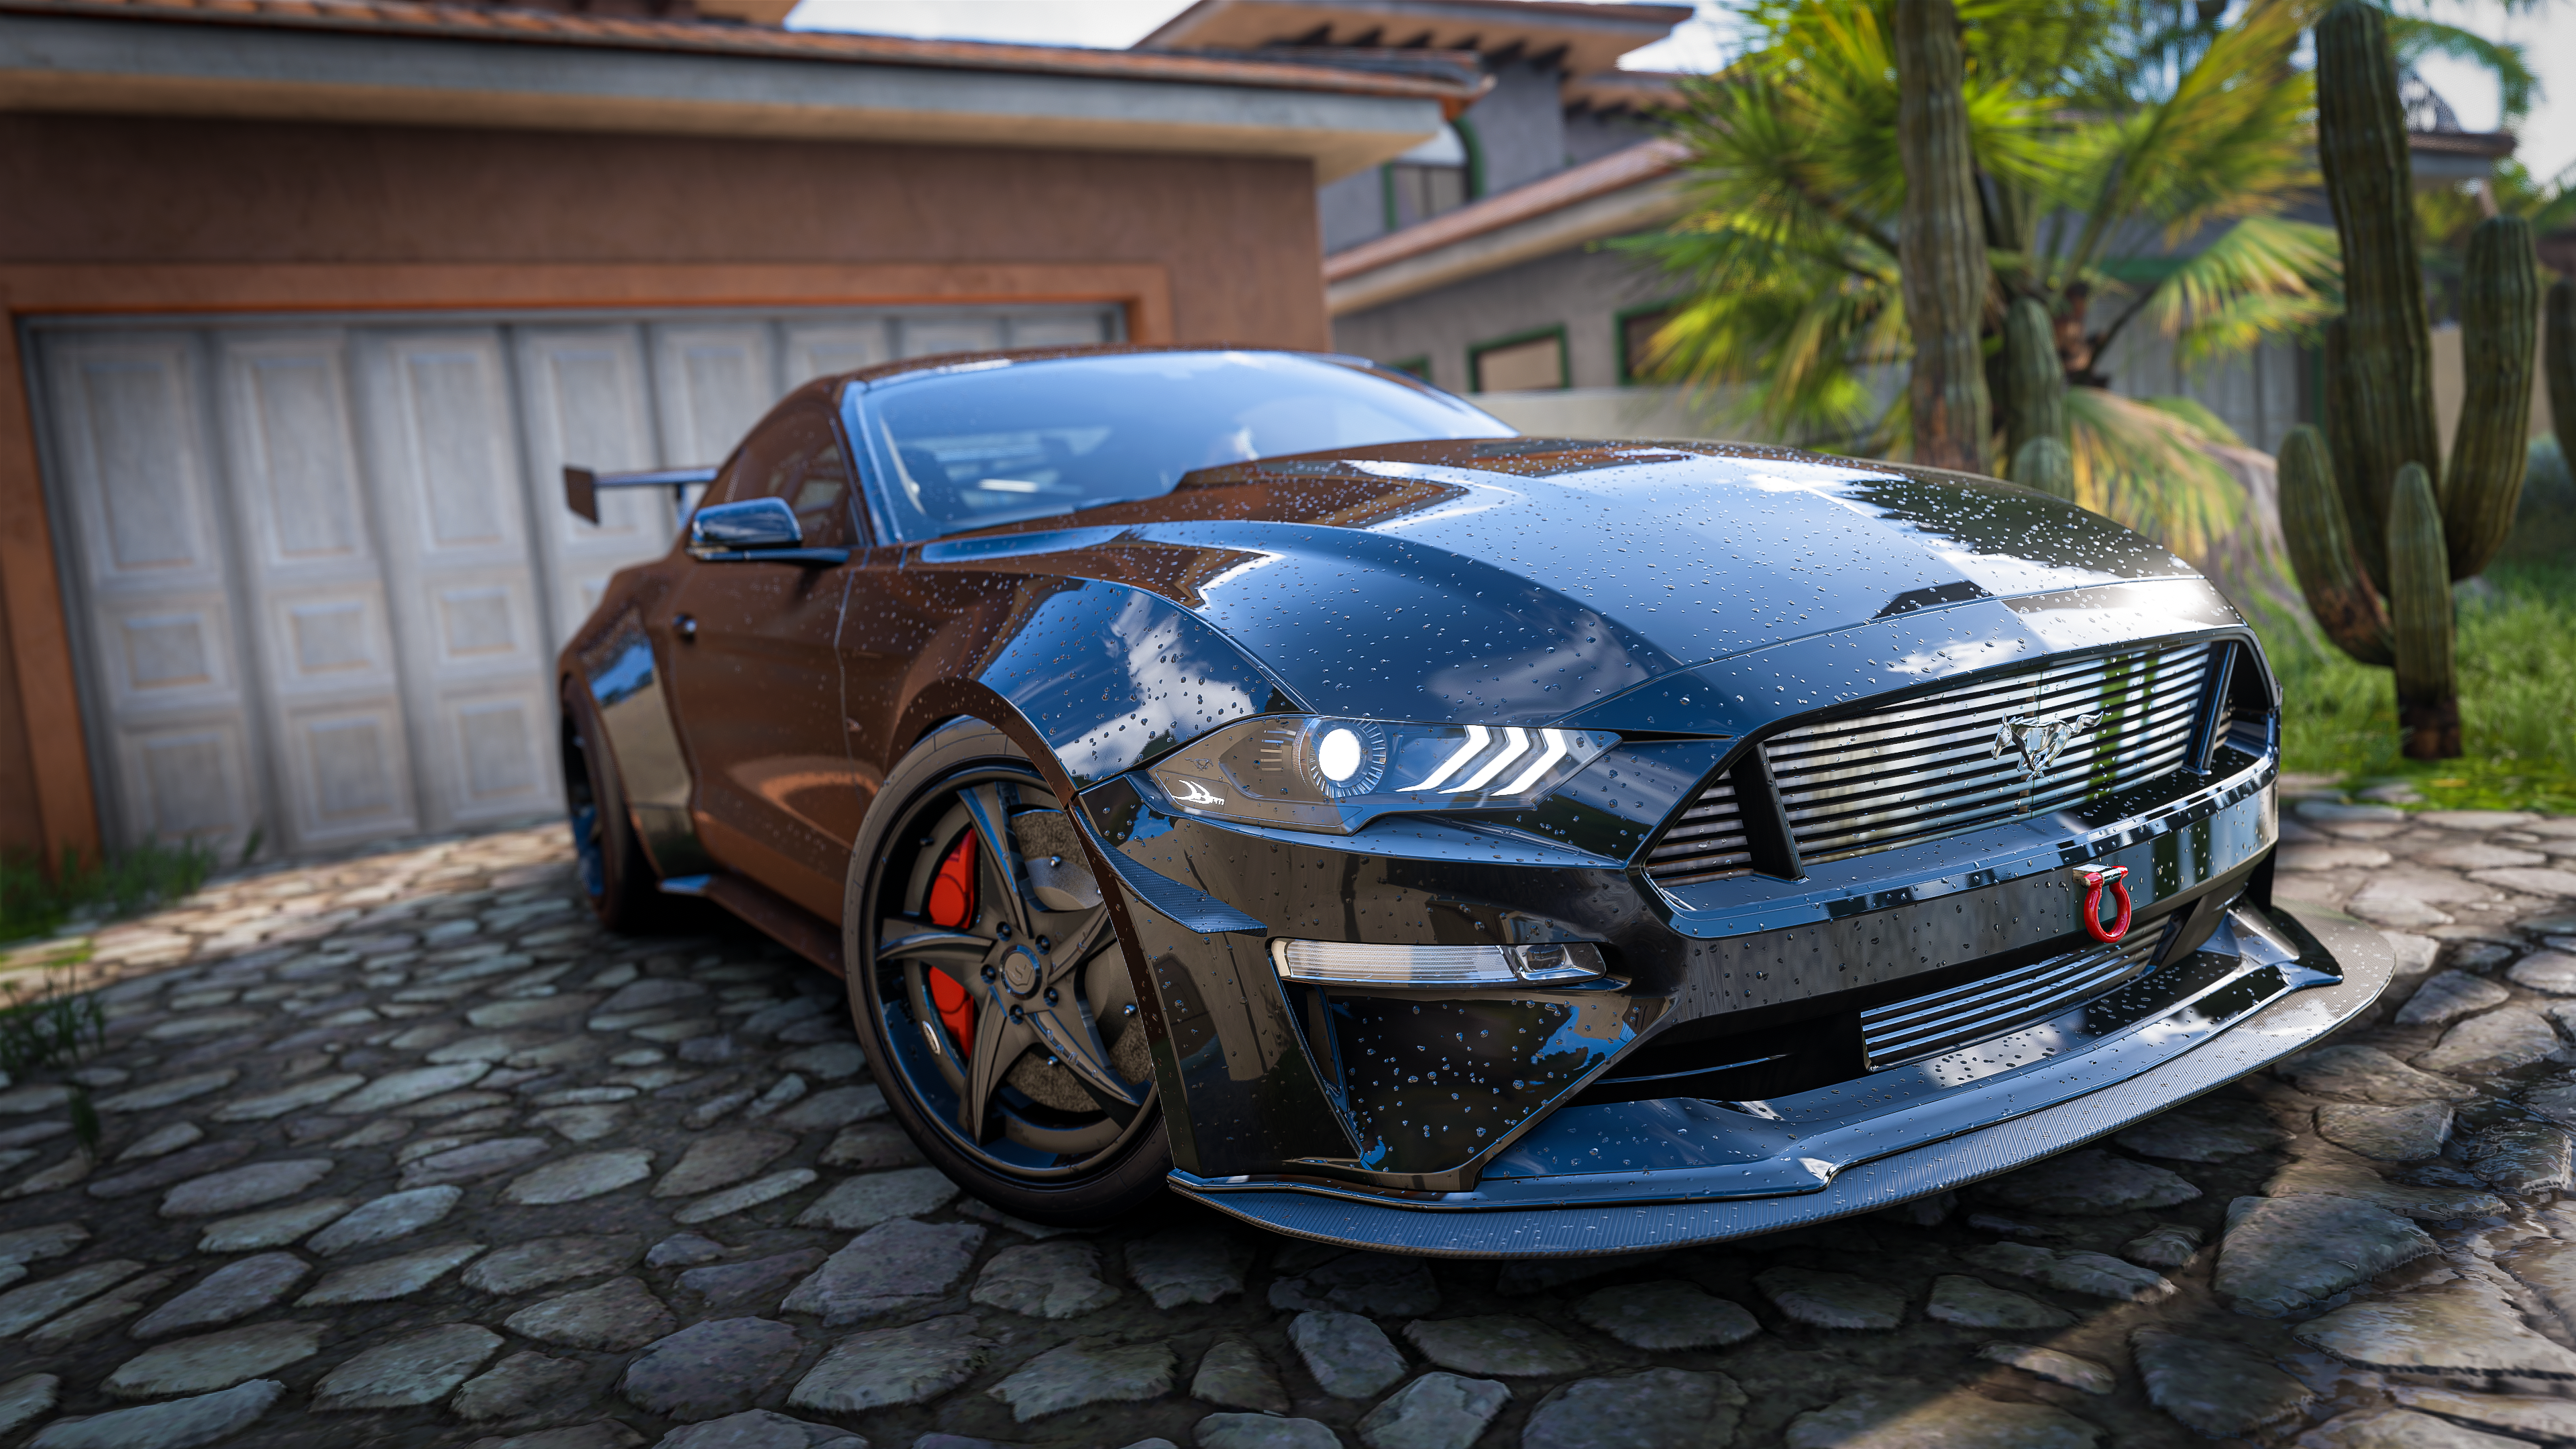 General 3840x2160 Ford Mustang Ford Mustang GT Concept Forza Horizon 5 Forza Horizon Forza Video Game Heroes car vehicle race cars drift cars reflection CGI palm trees wheels Ford PlaygroundGames muscle cars American cars video games headlights screen shot